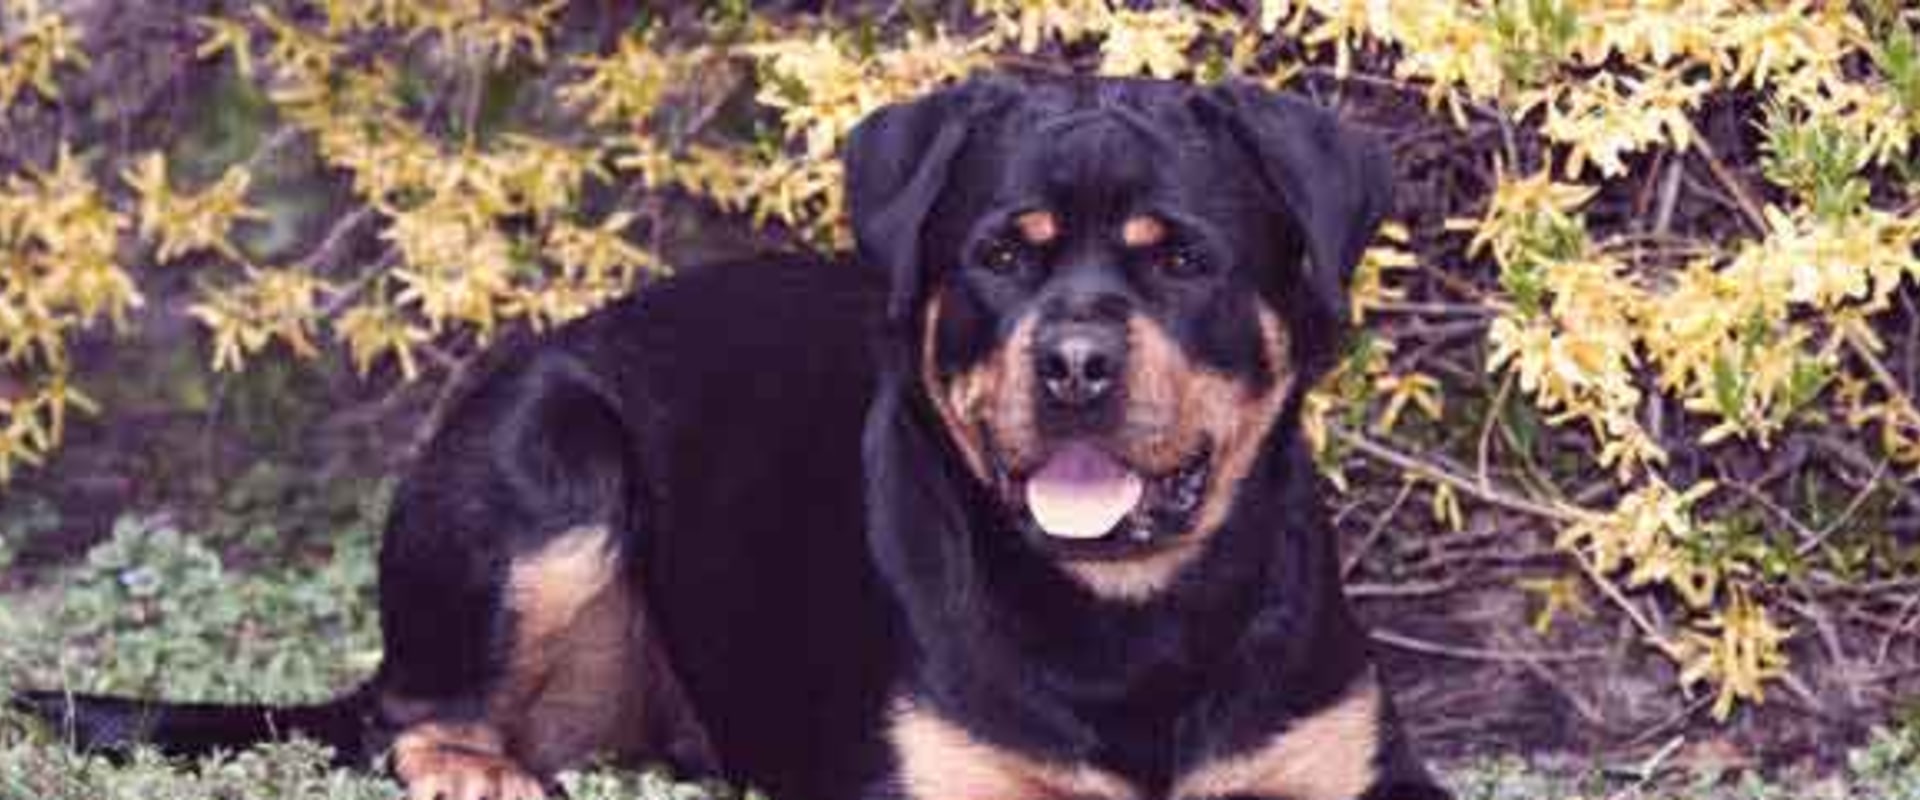 What foods are toxic to rottweilers?